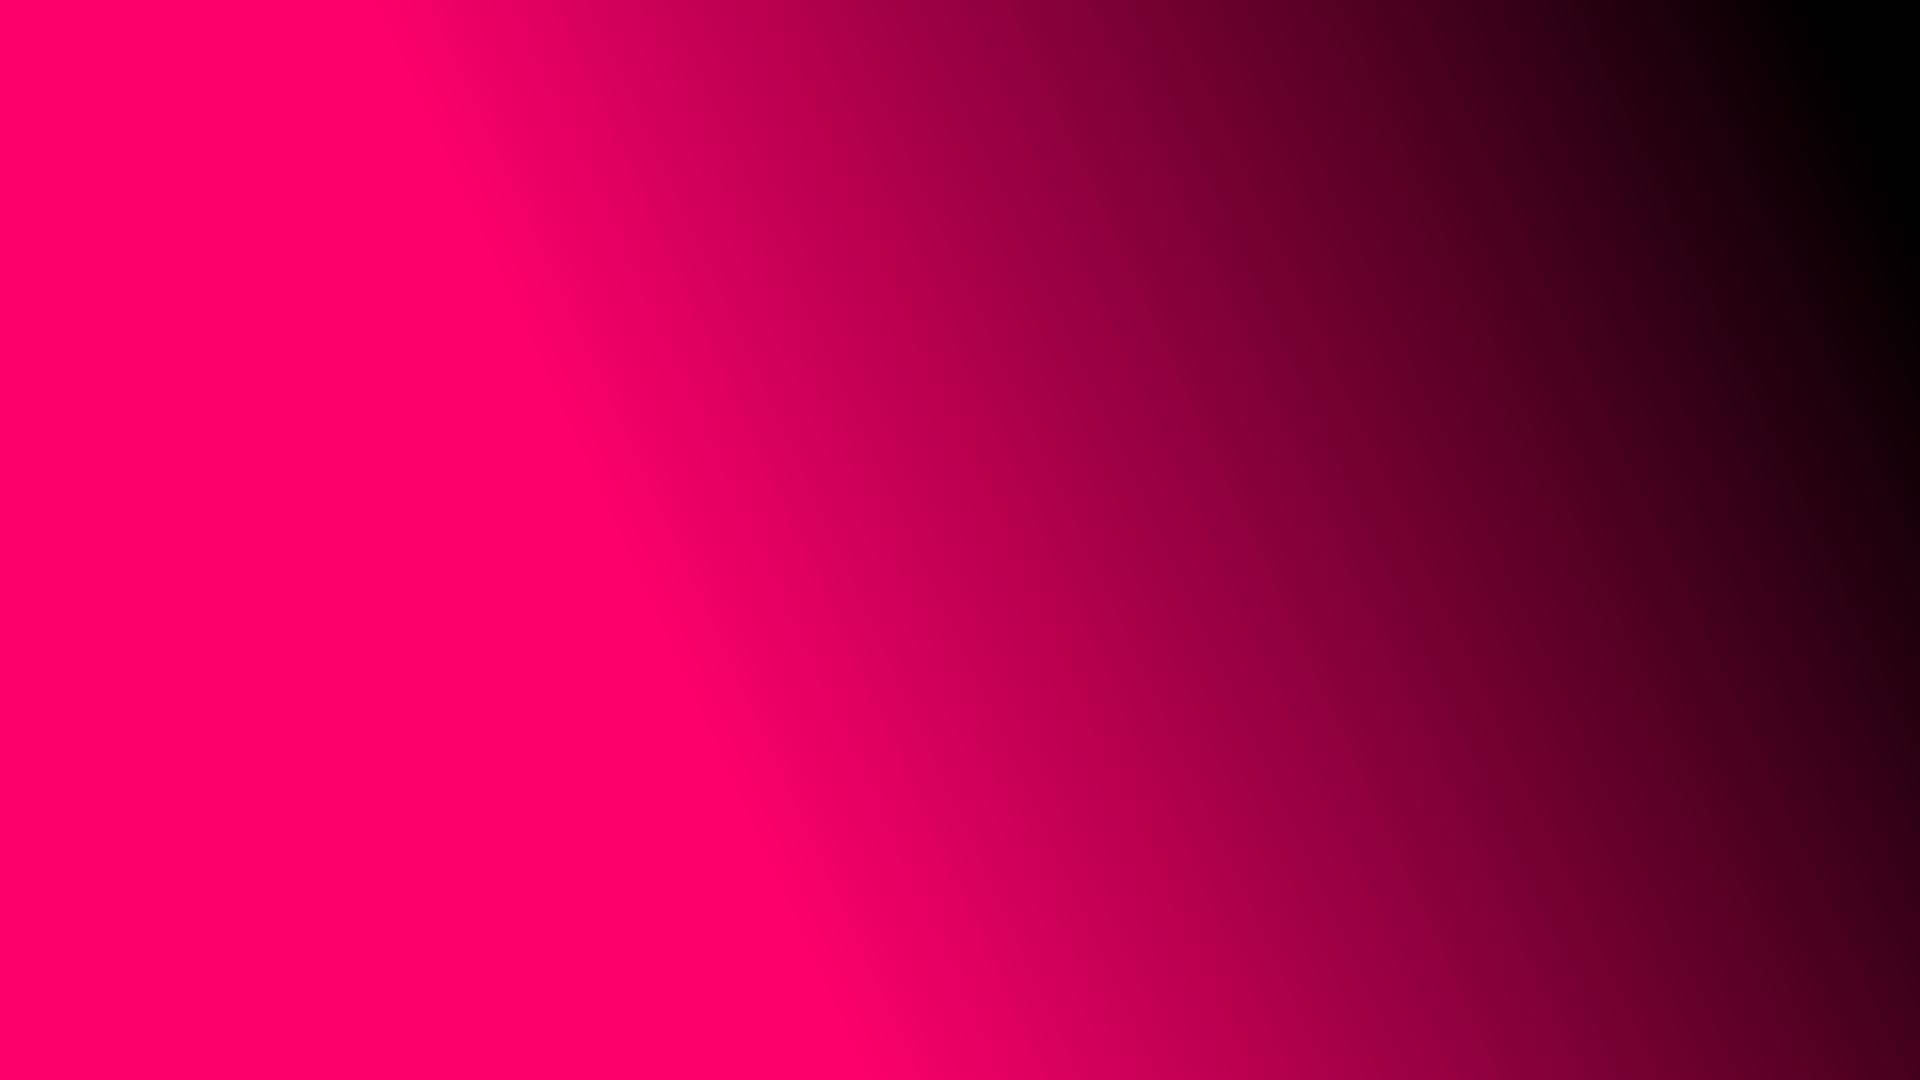 Black And Pink Aesthetic Linear Gradient Picture